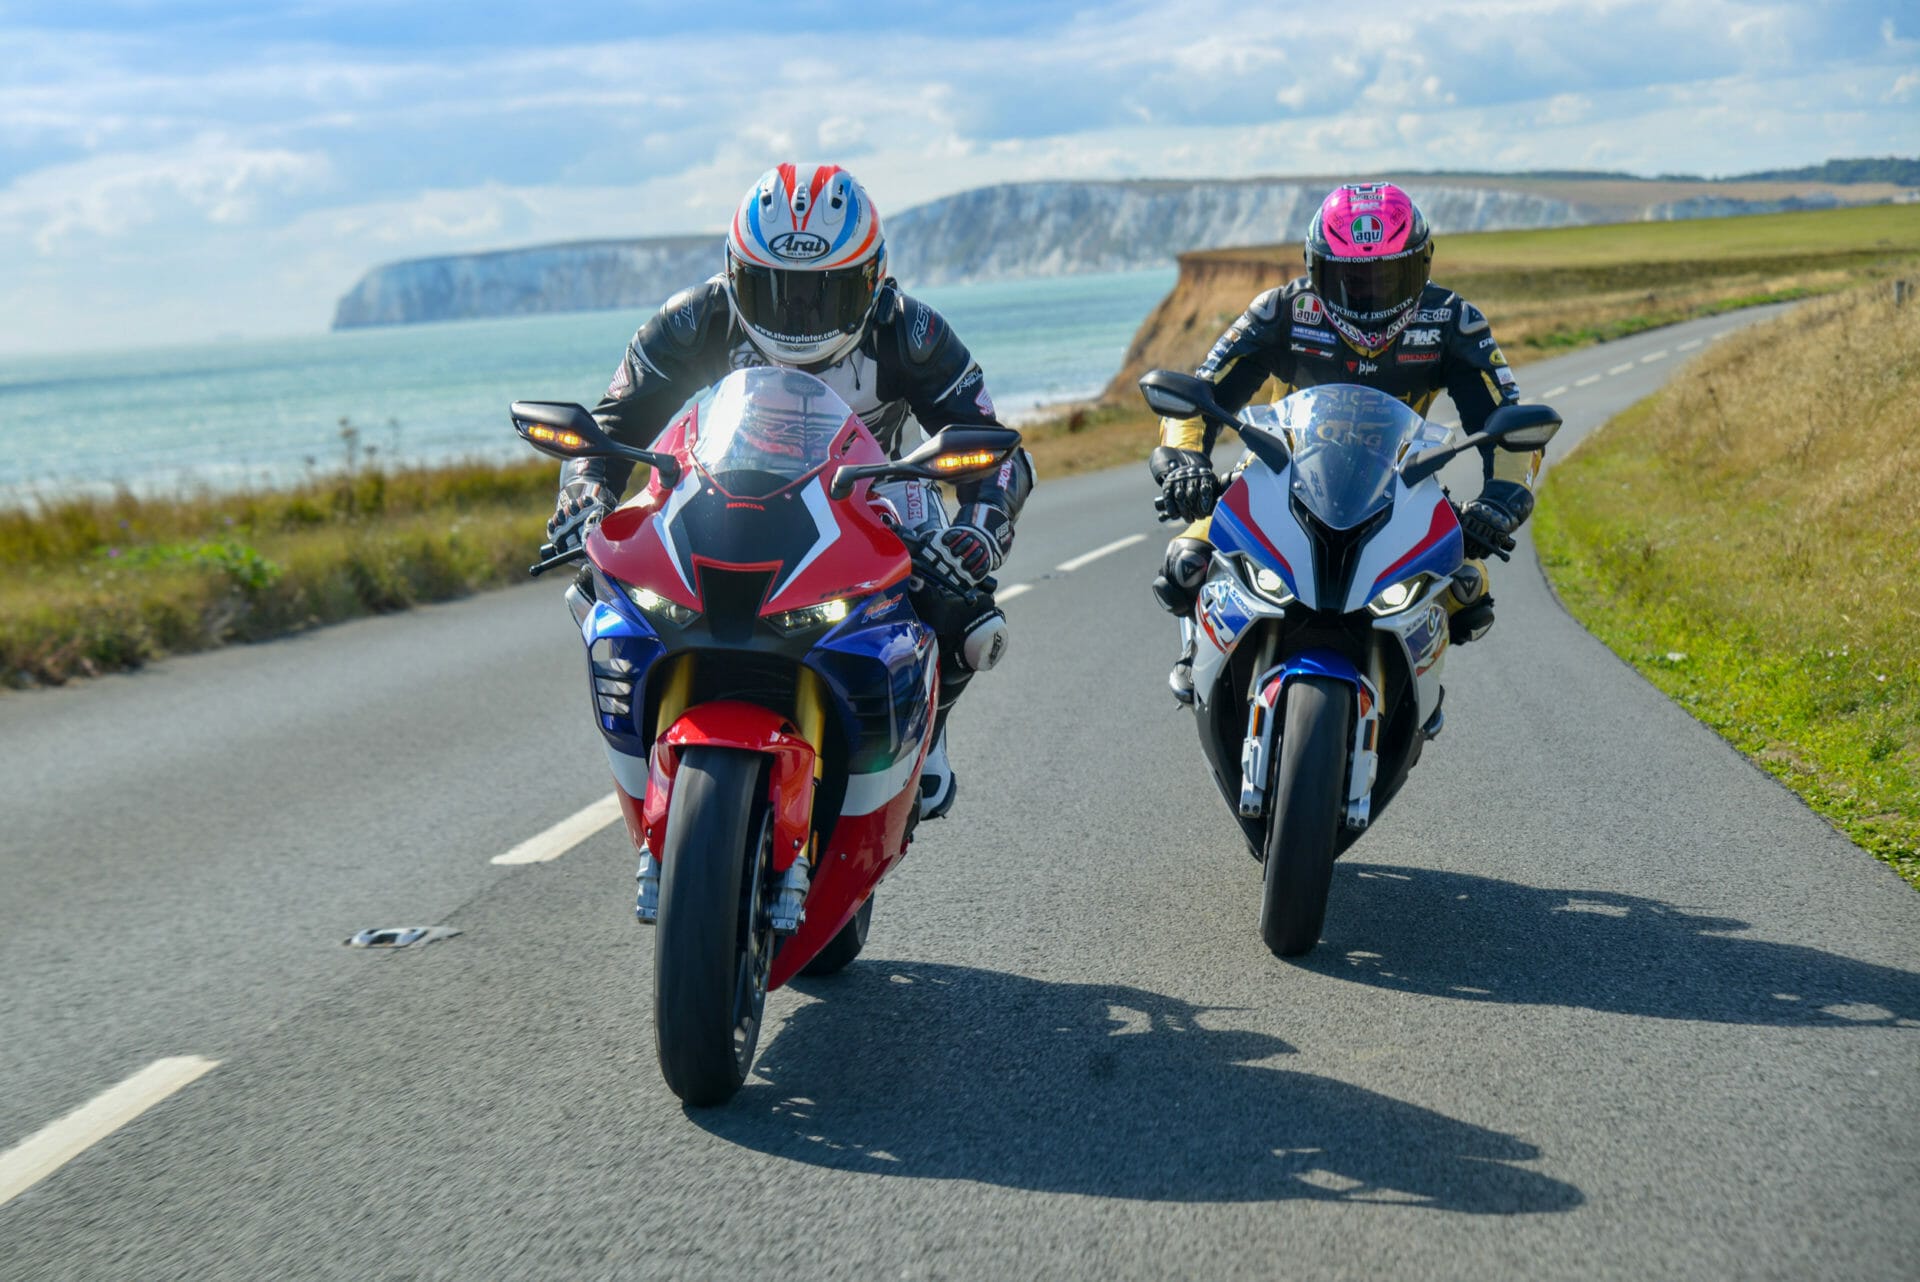 Road Race on the Isle of Wight postponed
- also in the MOTORCYCLES.NEWS APP